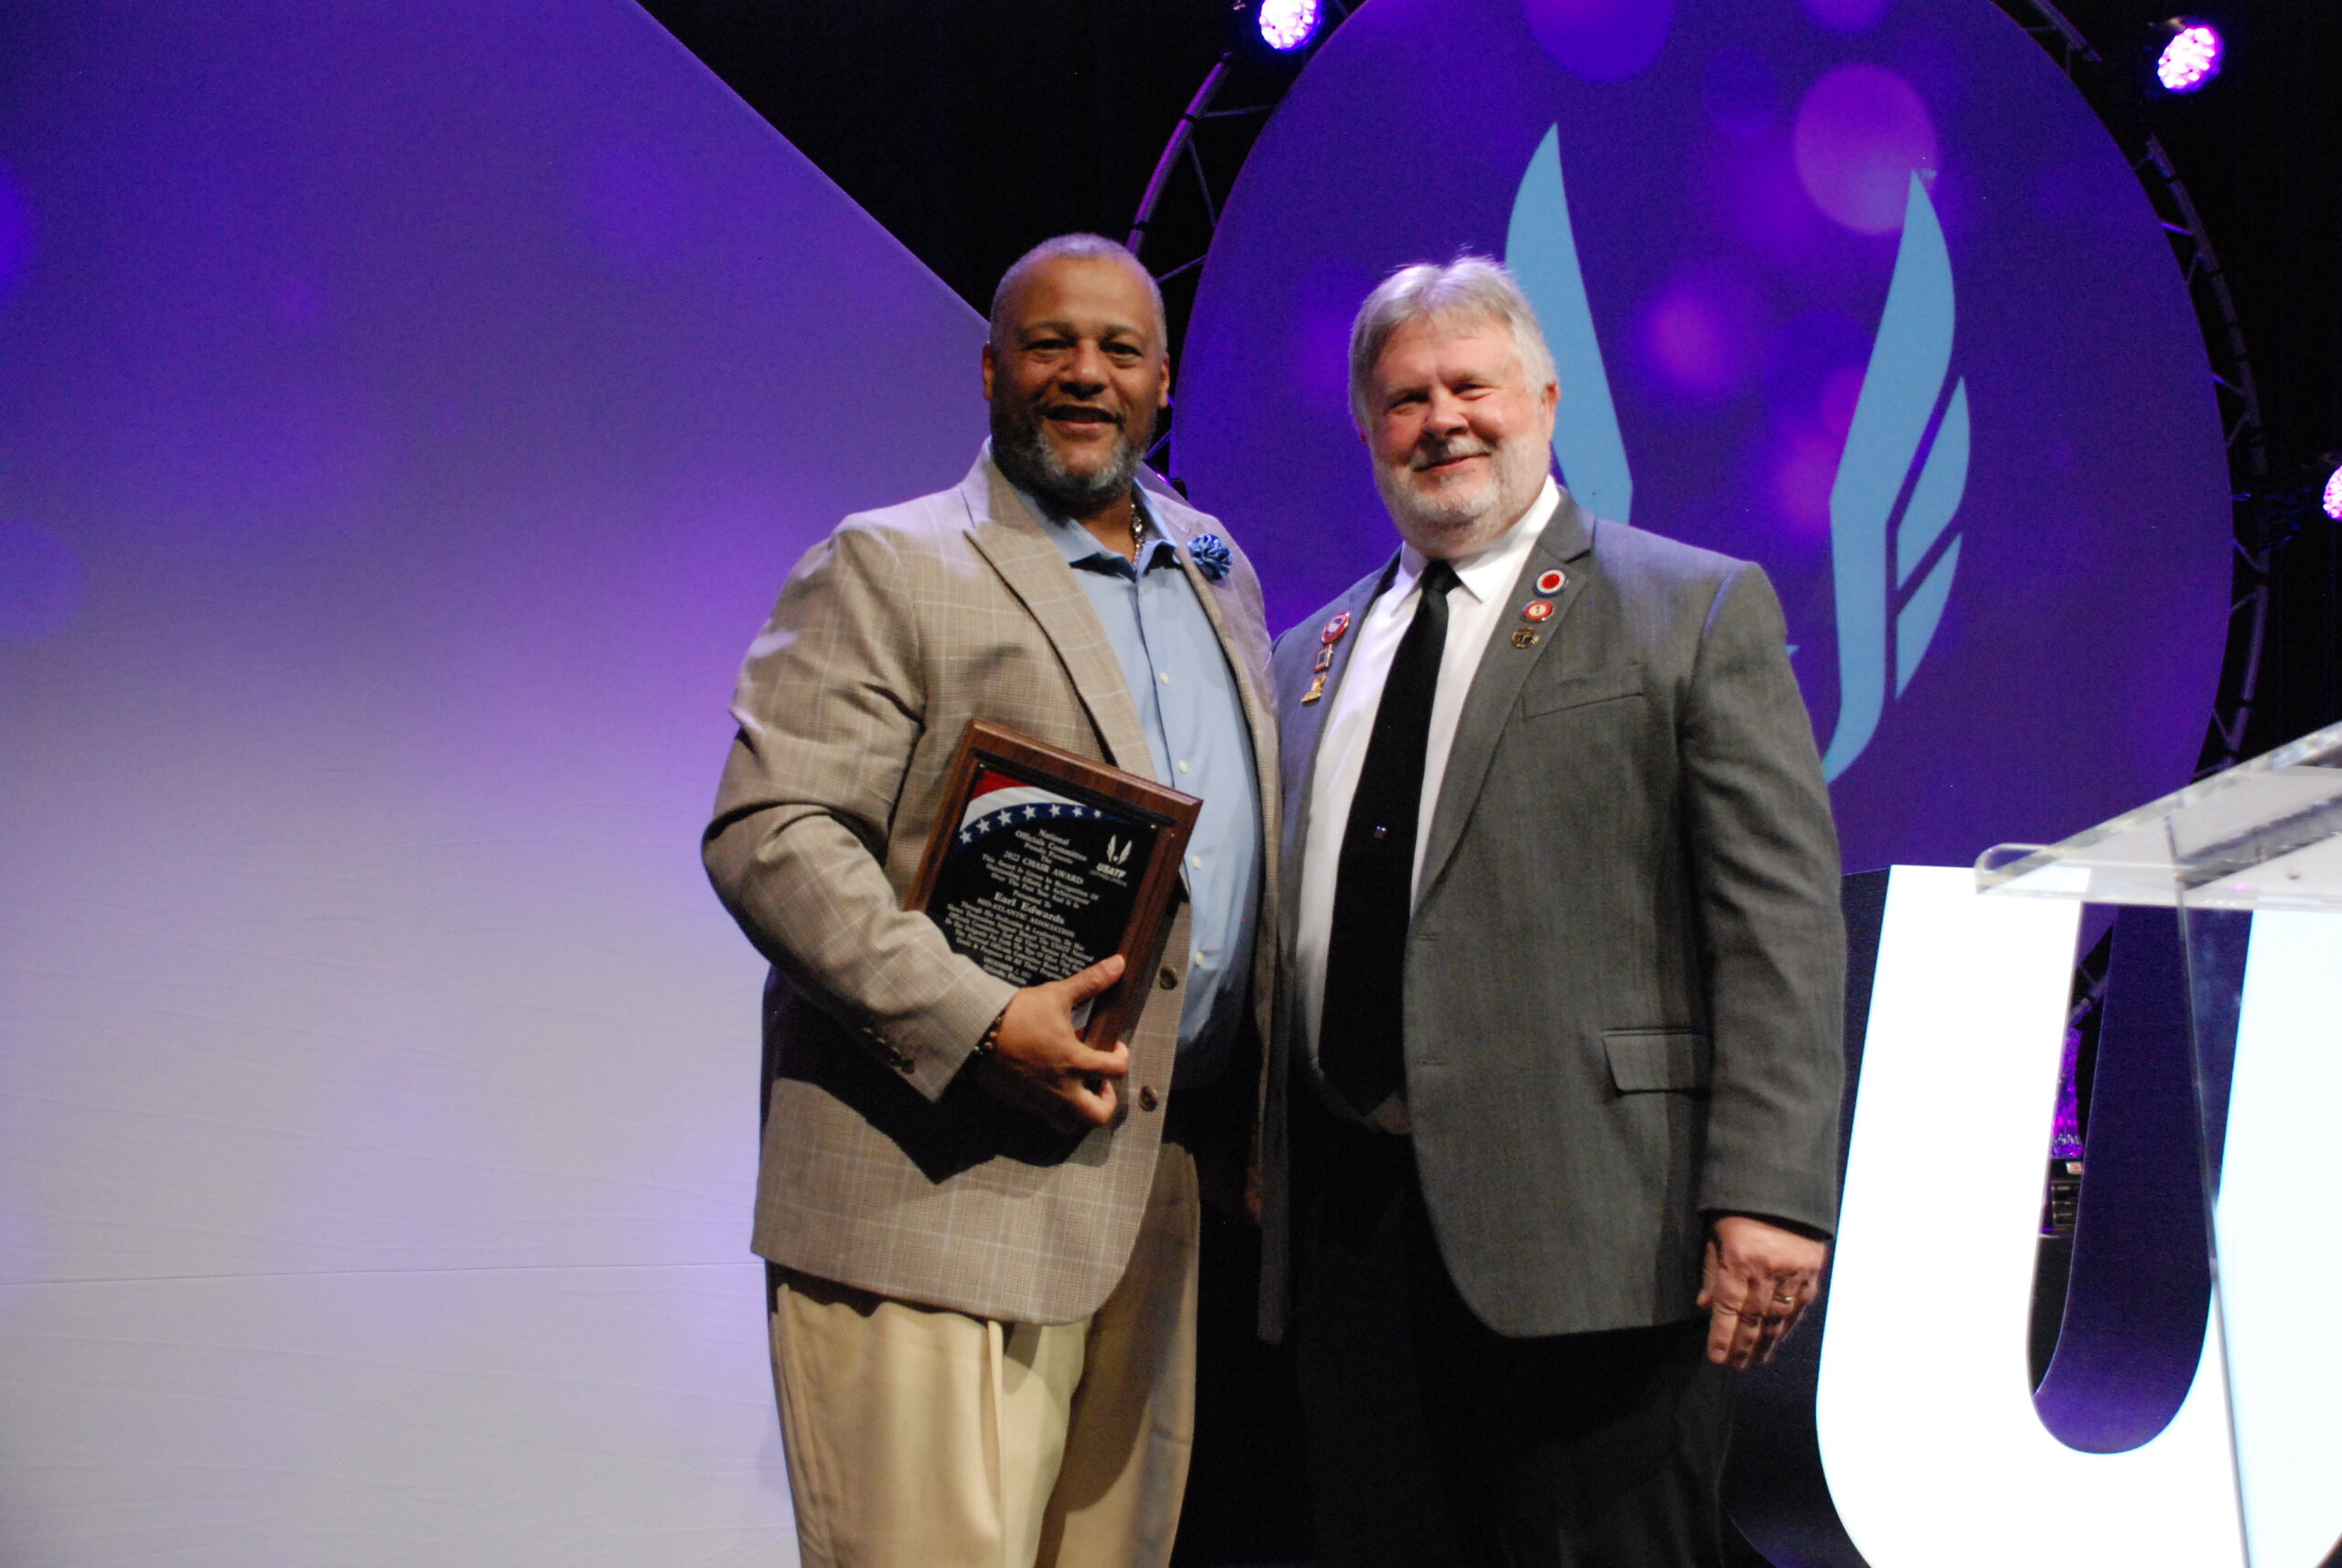 Congratulations to Mid-Atlantic Officials Chair Earl Edwards